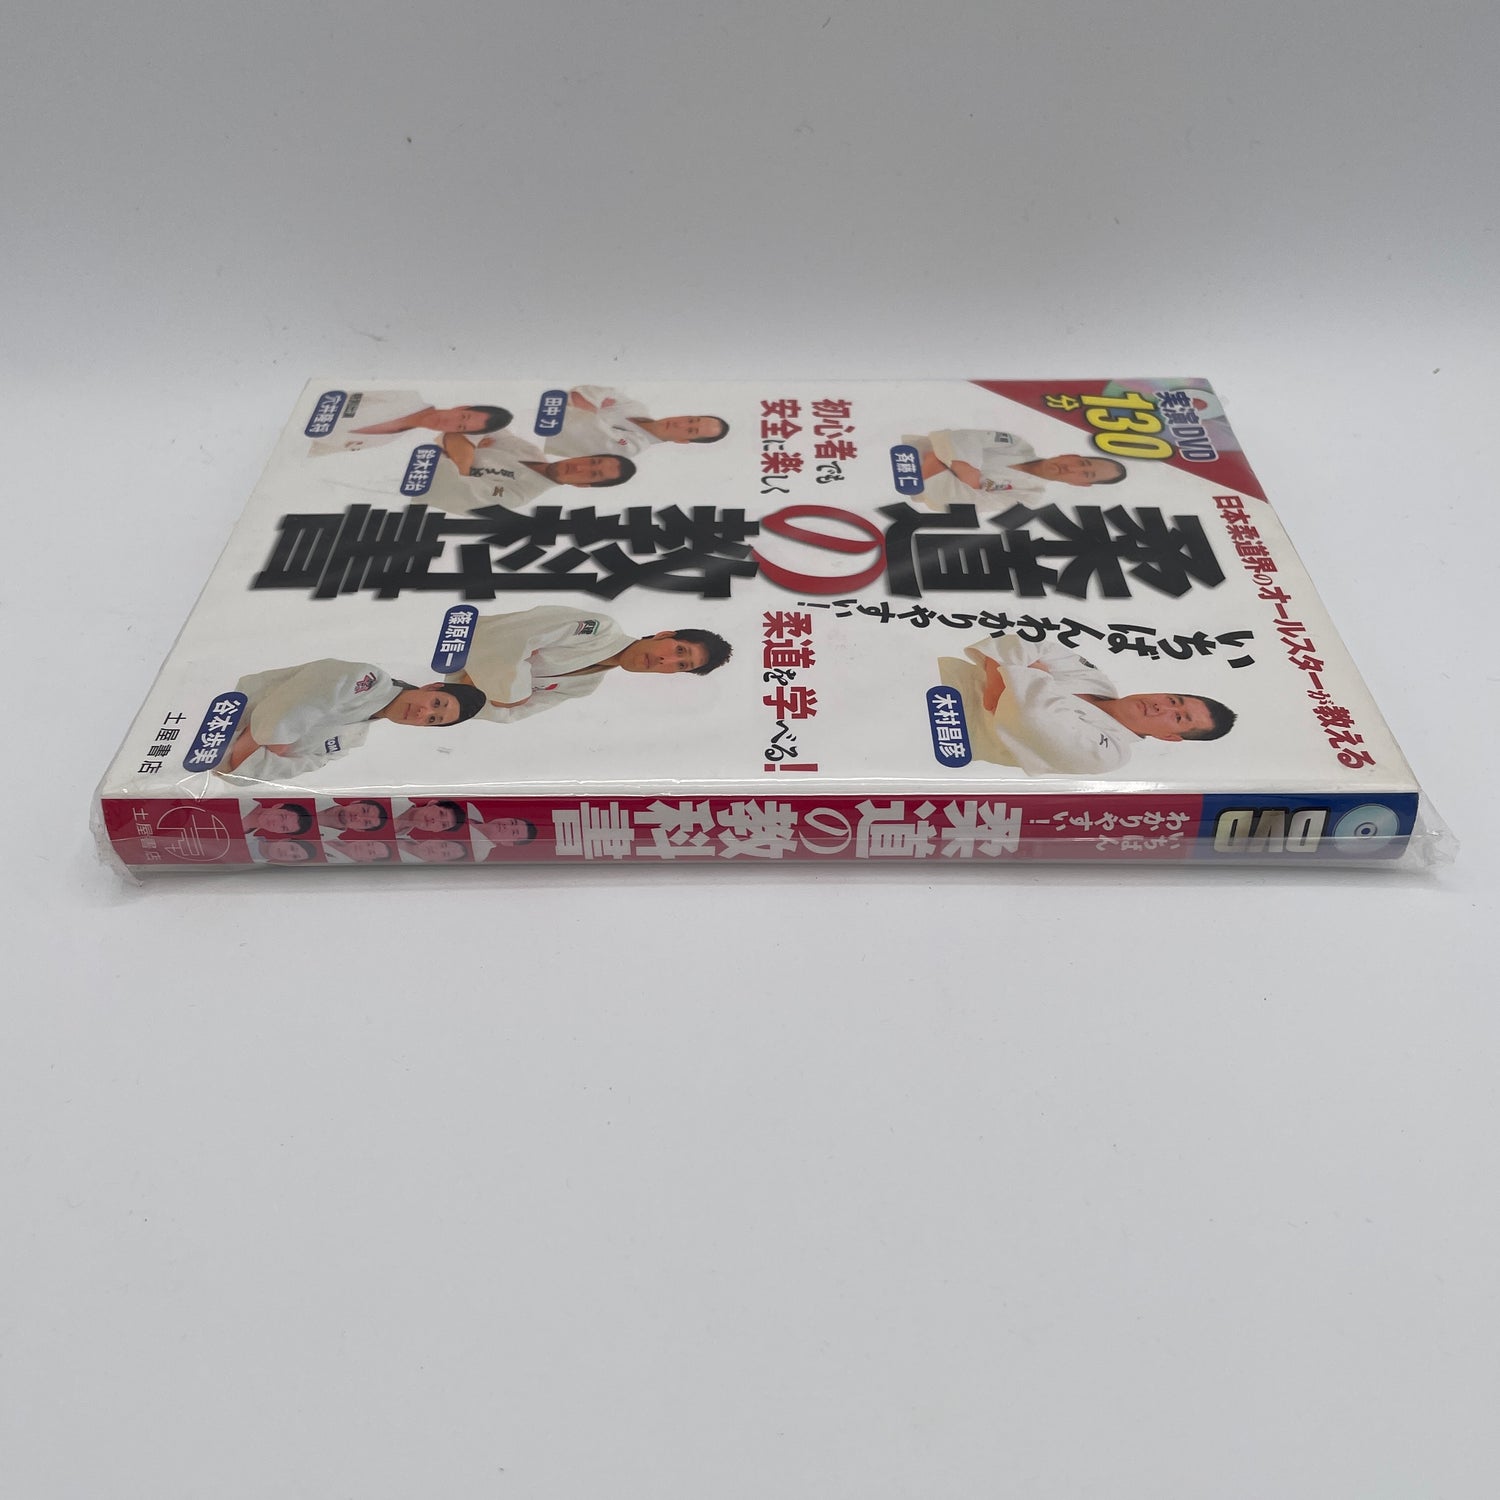 Judo Textbook & DVD with 8 Instructors (Preowned)